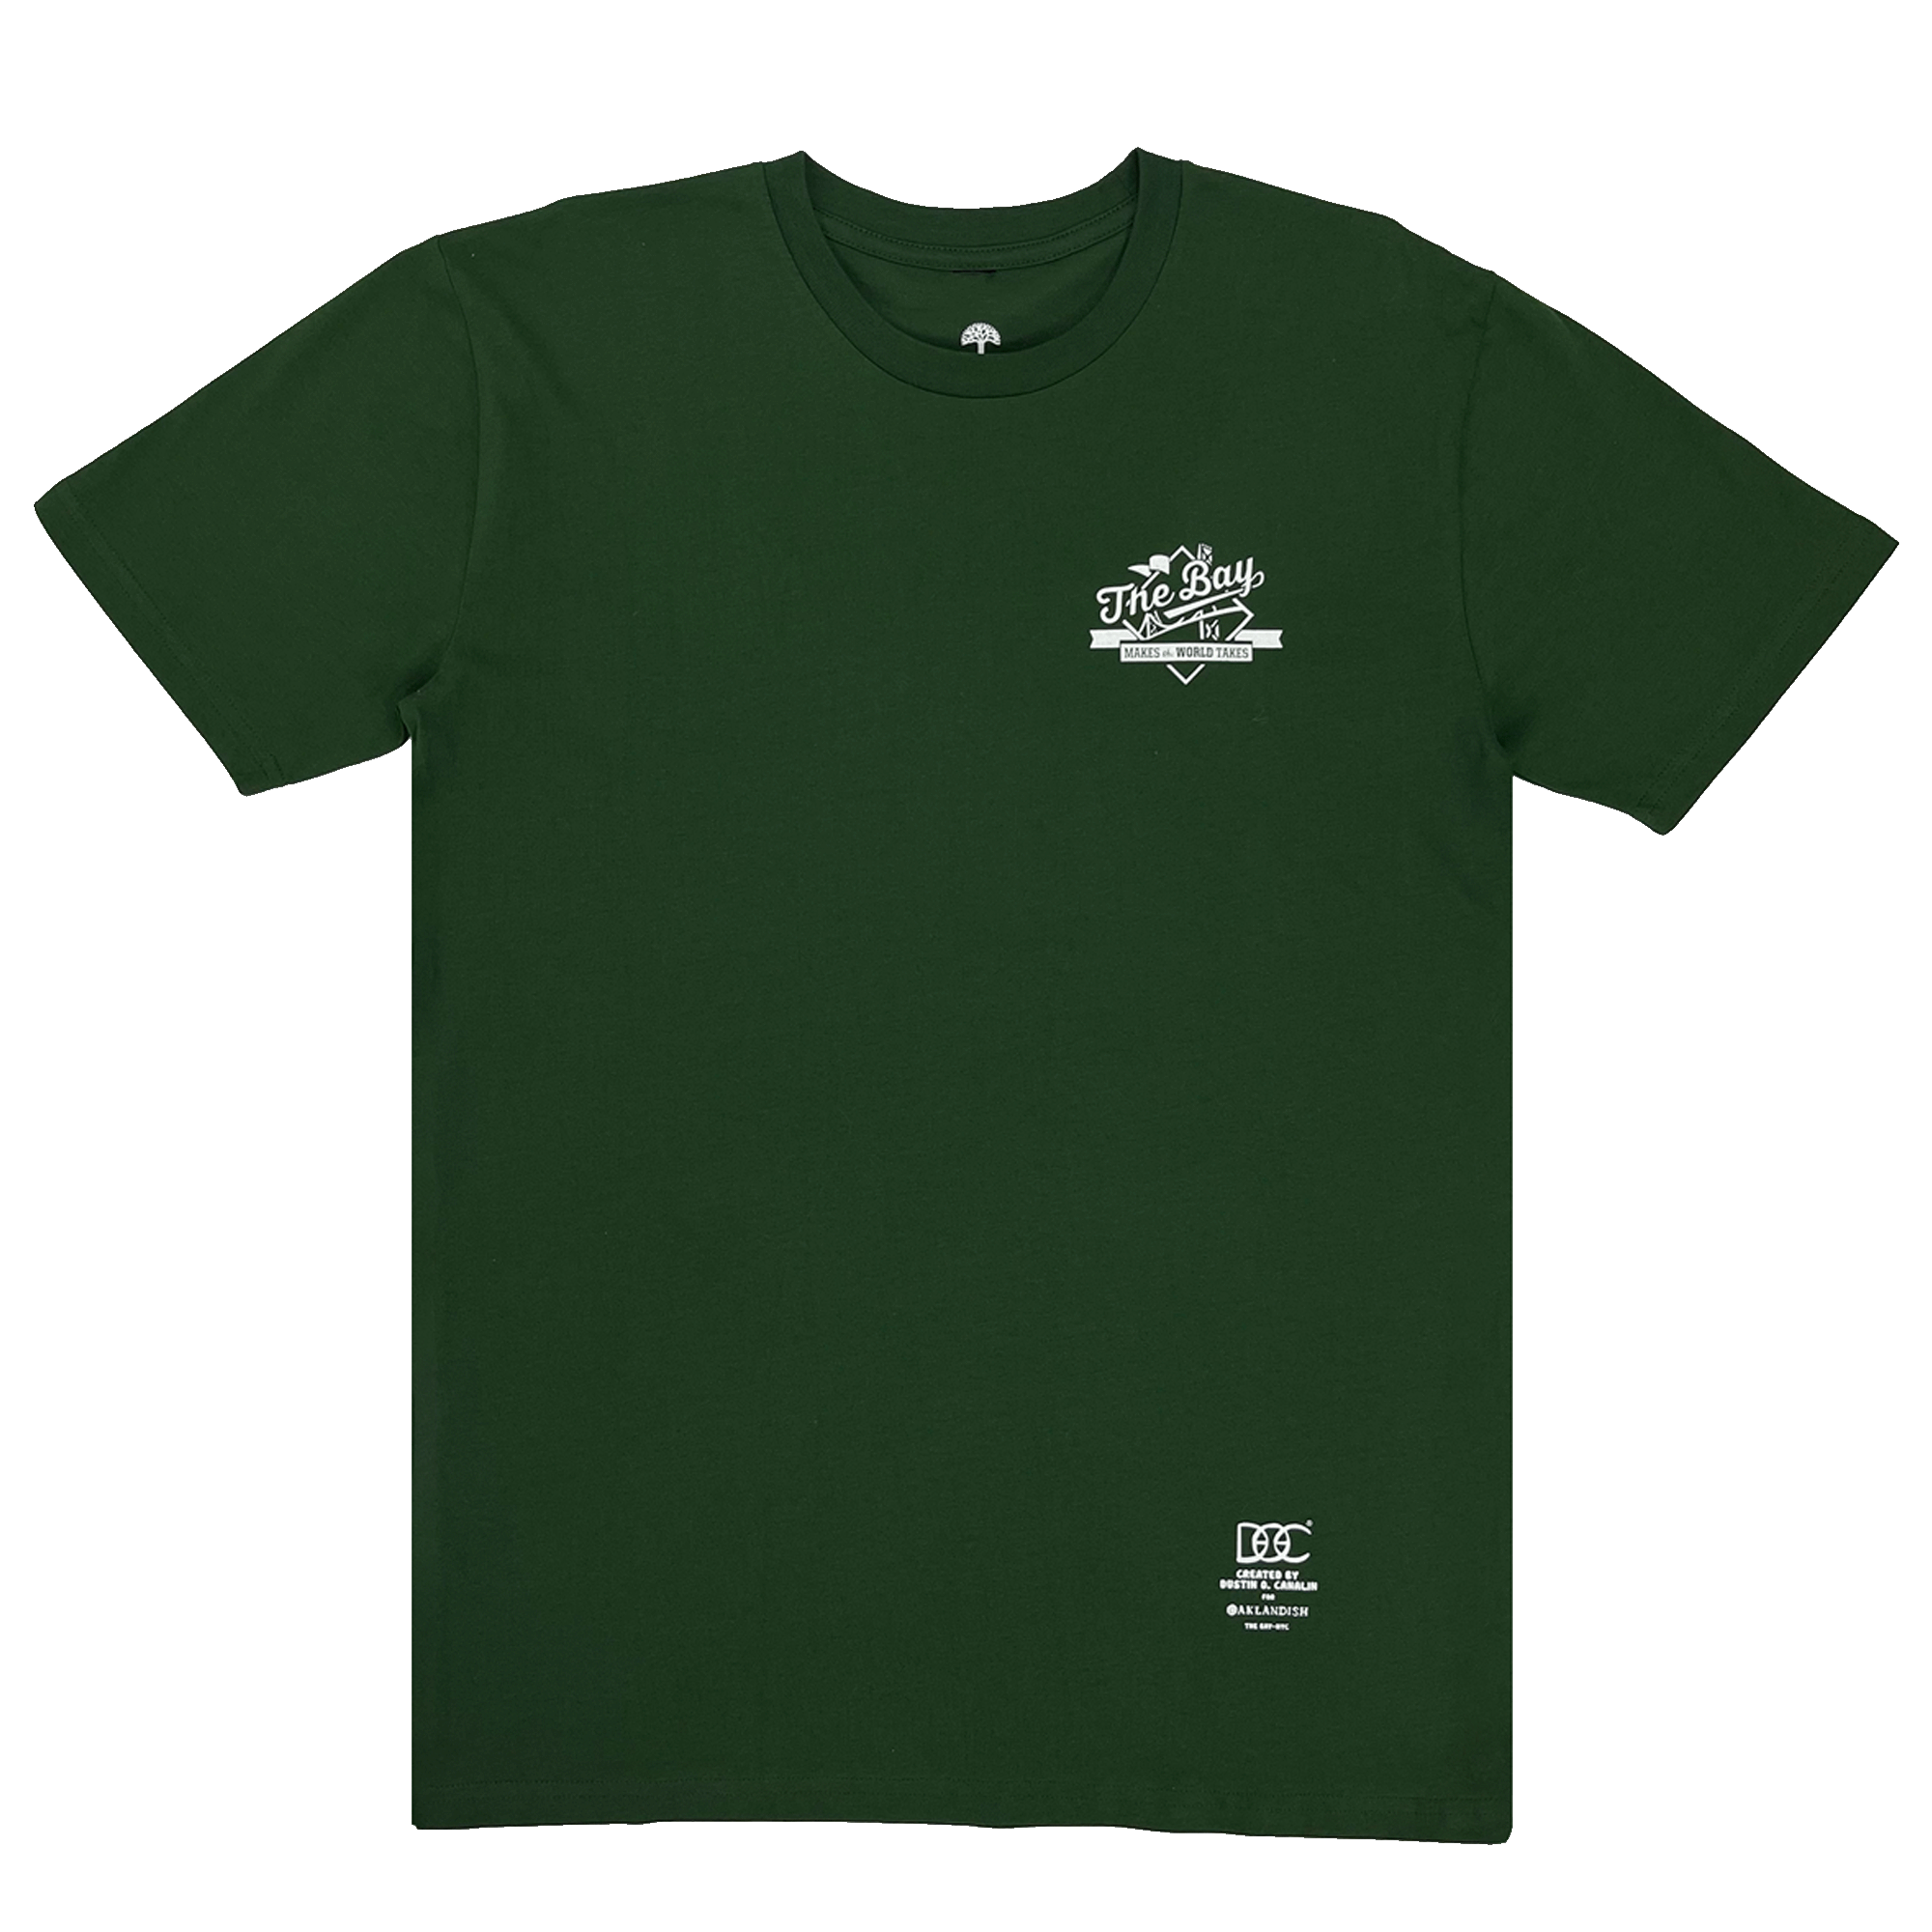 Frontside view of a green t-shirt white The Bay Makes The World Takes logo graphic on left chest wearside.